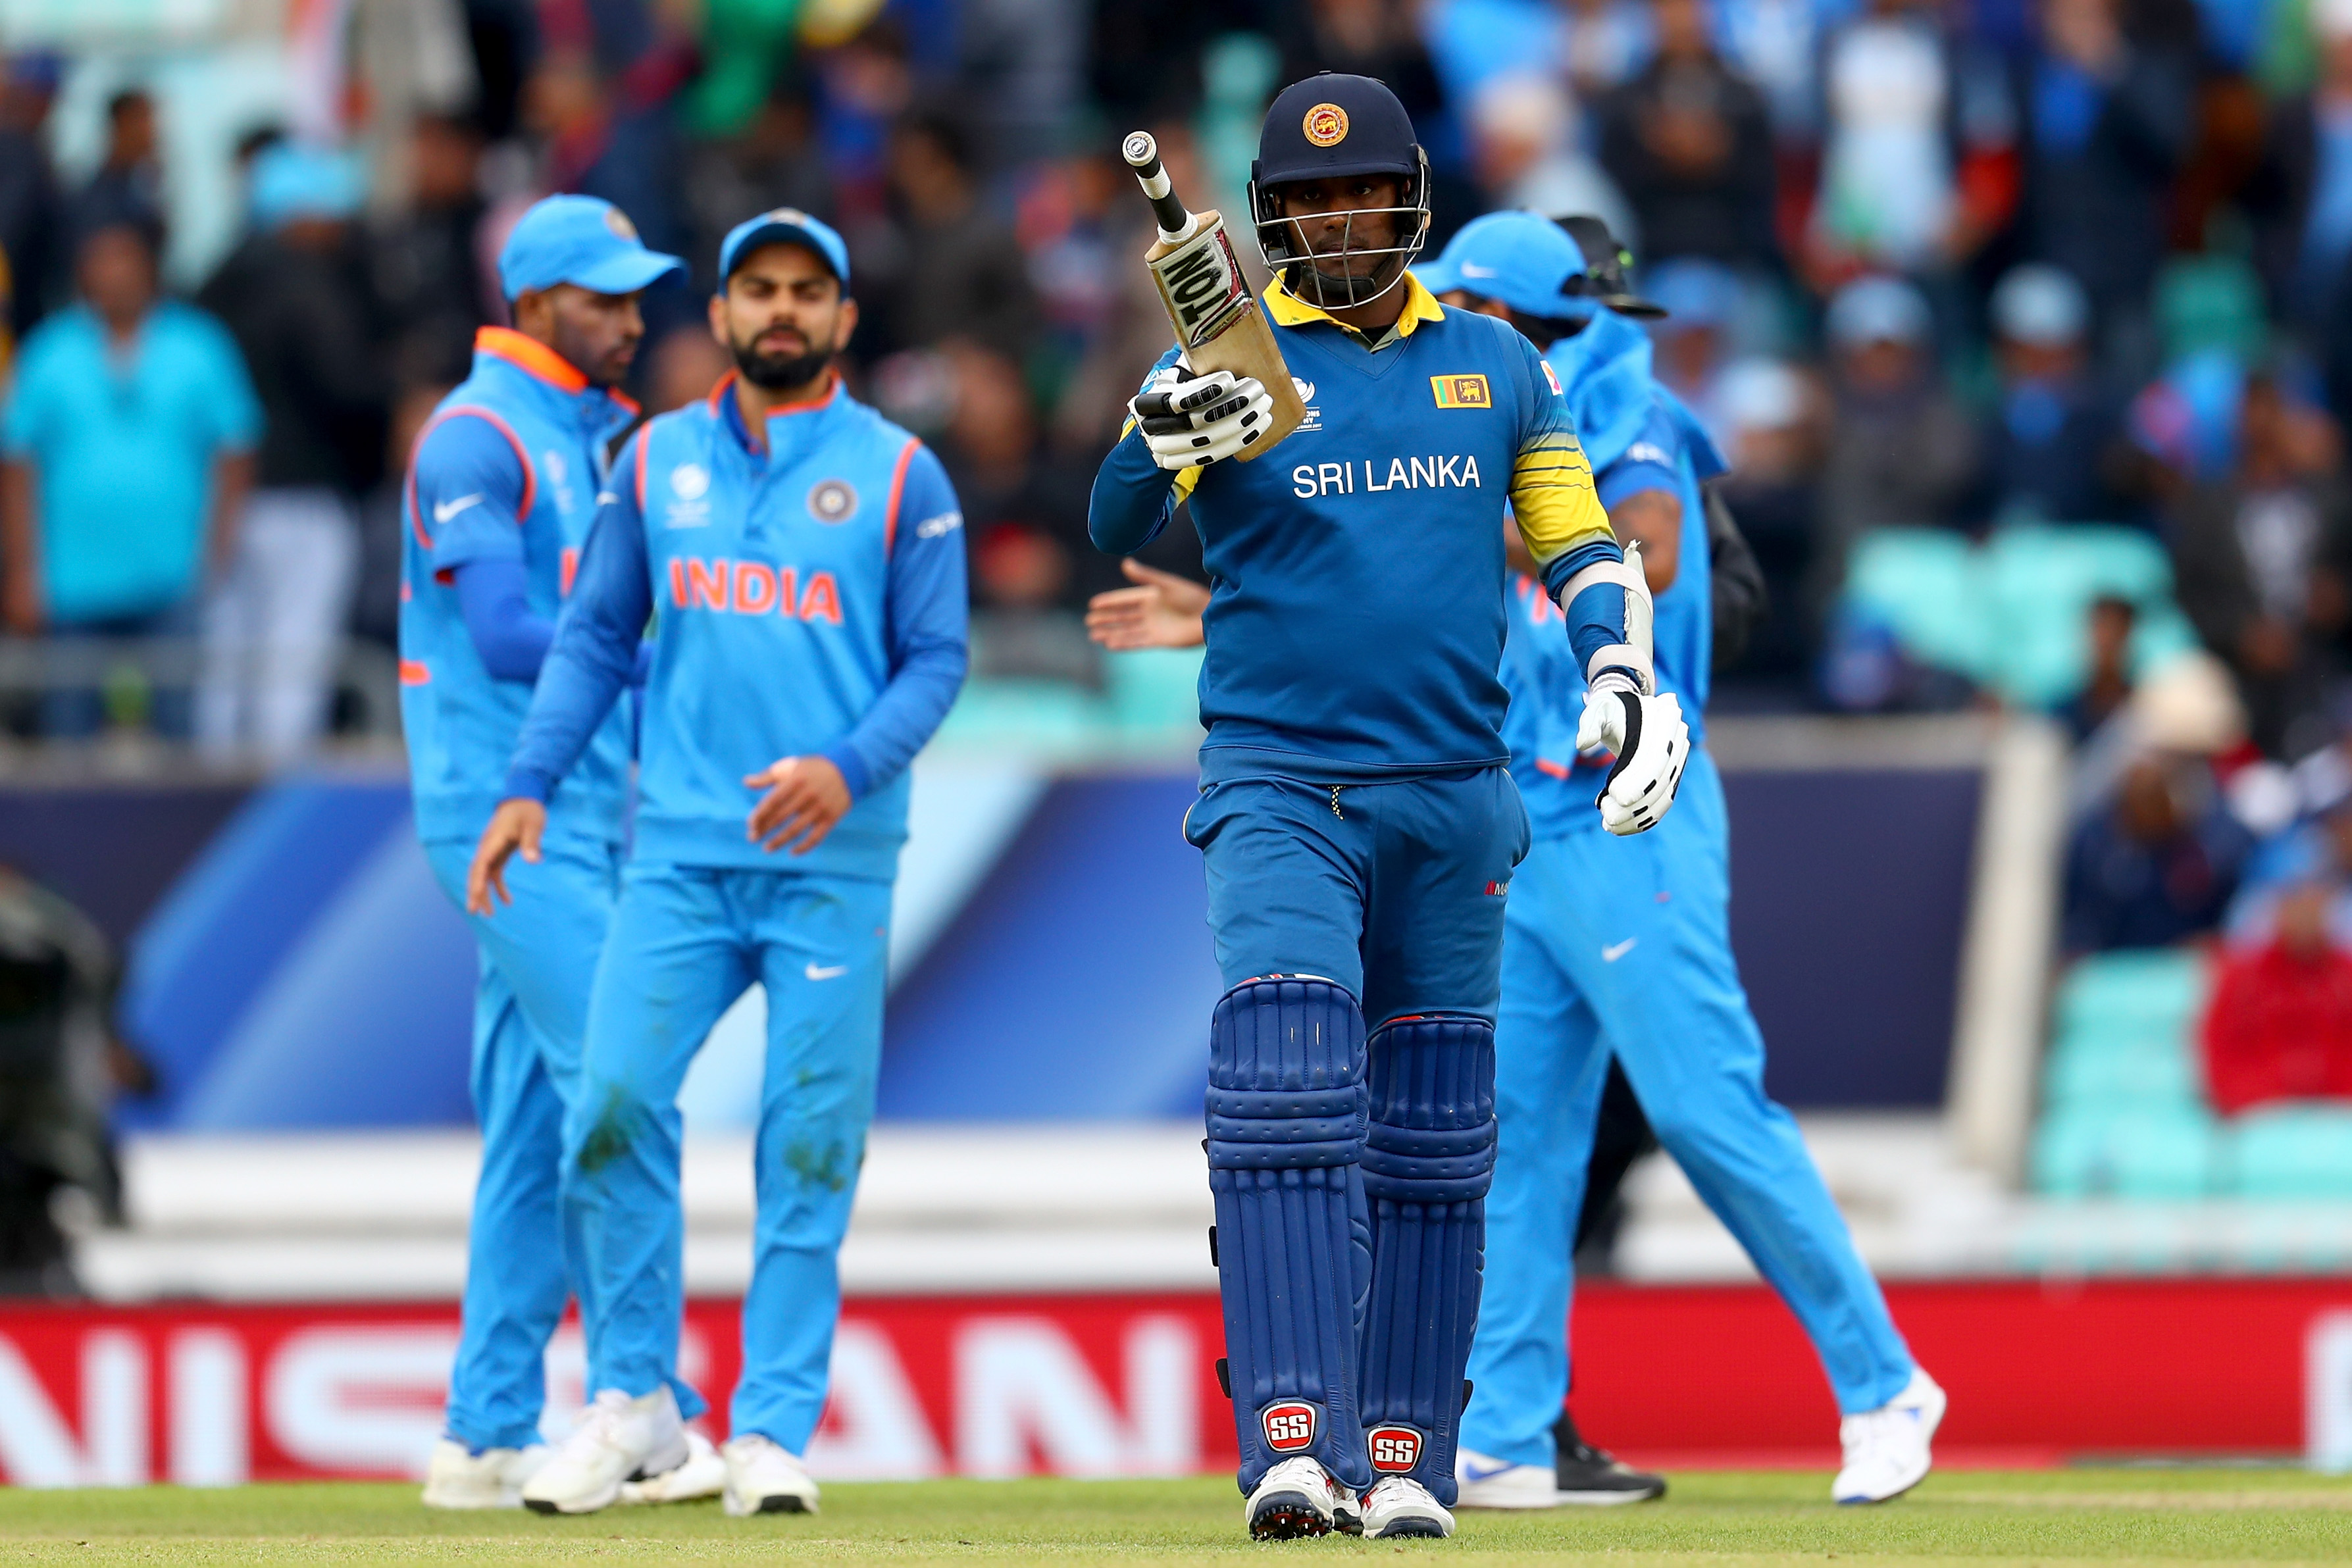 ACC has confirmed Sri Lanka as new host for 2020 Asia Cup, reveals Shammi Silva